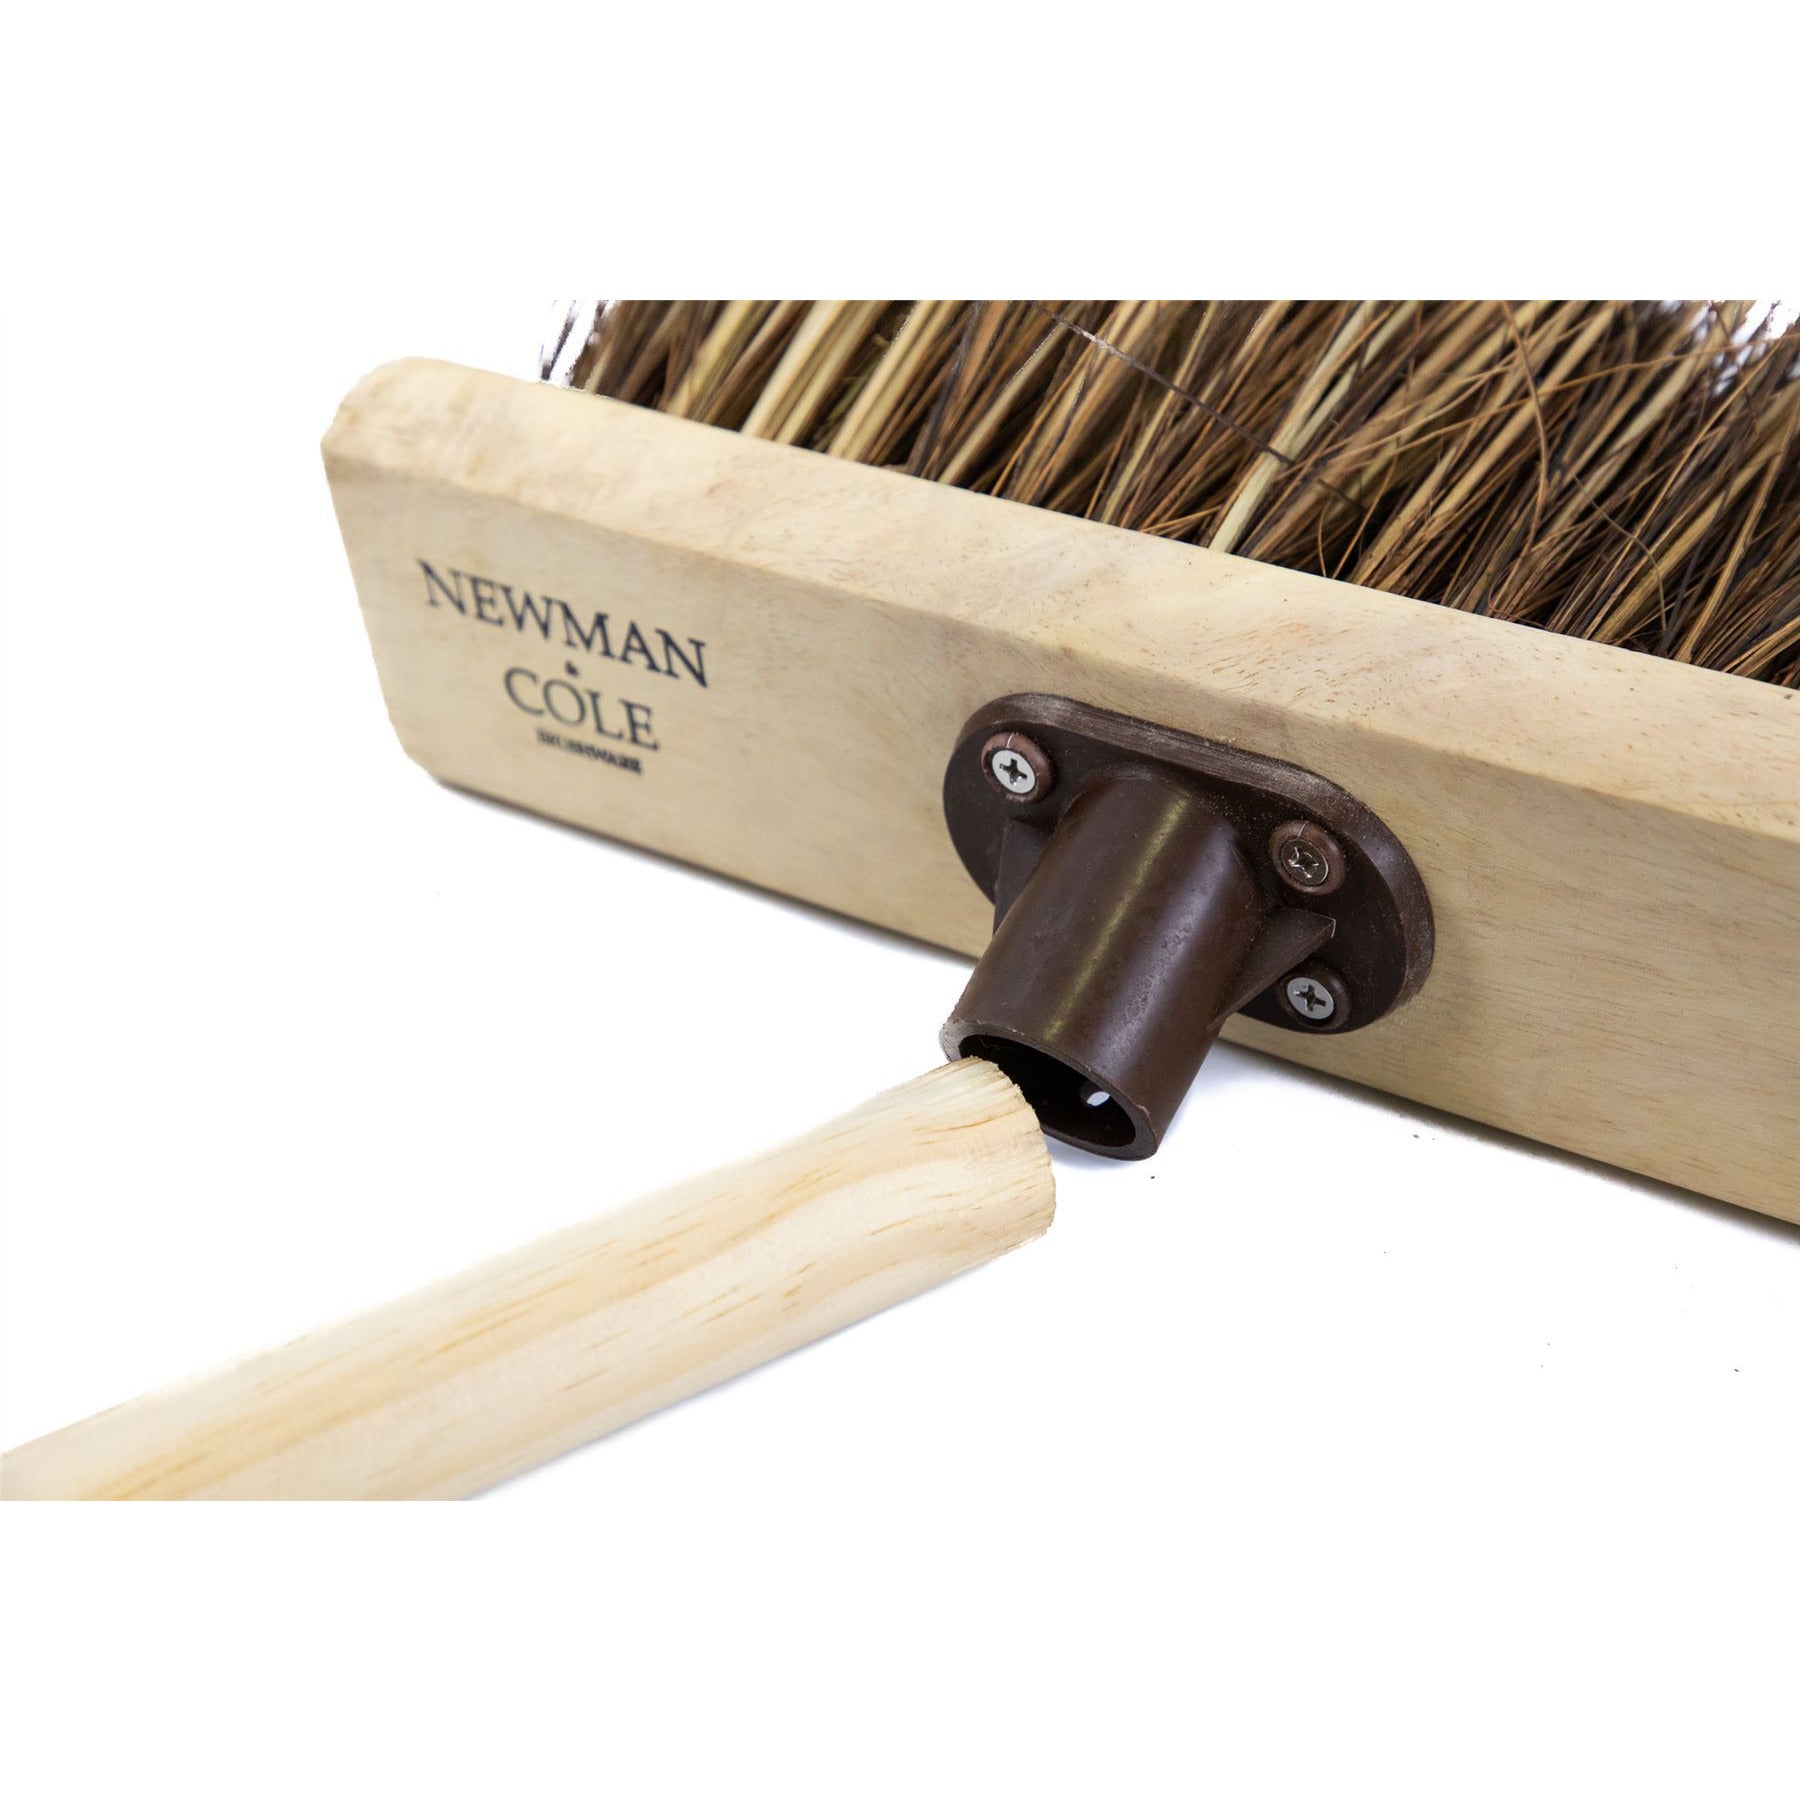 Newman and Cole 13" Bass & Cane Flat Broom Head with Plastic Socket - The Dustpan and Brush Store